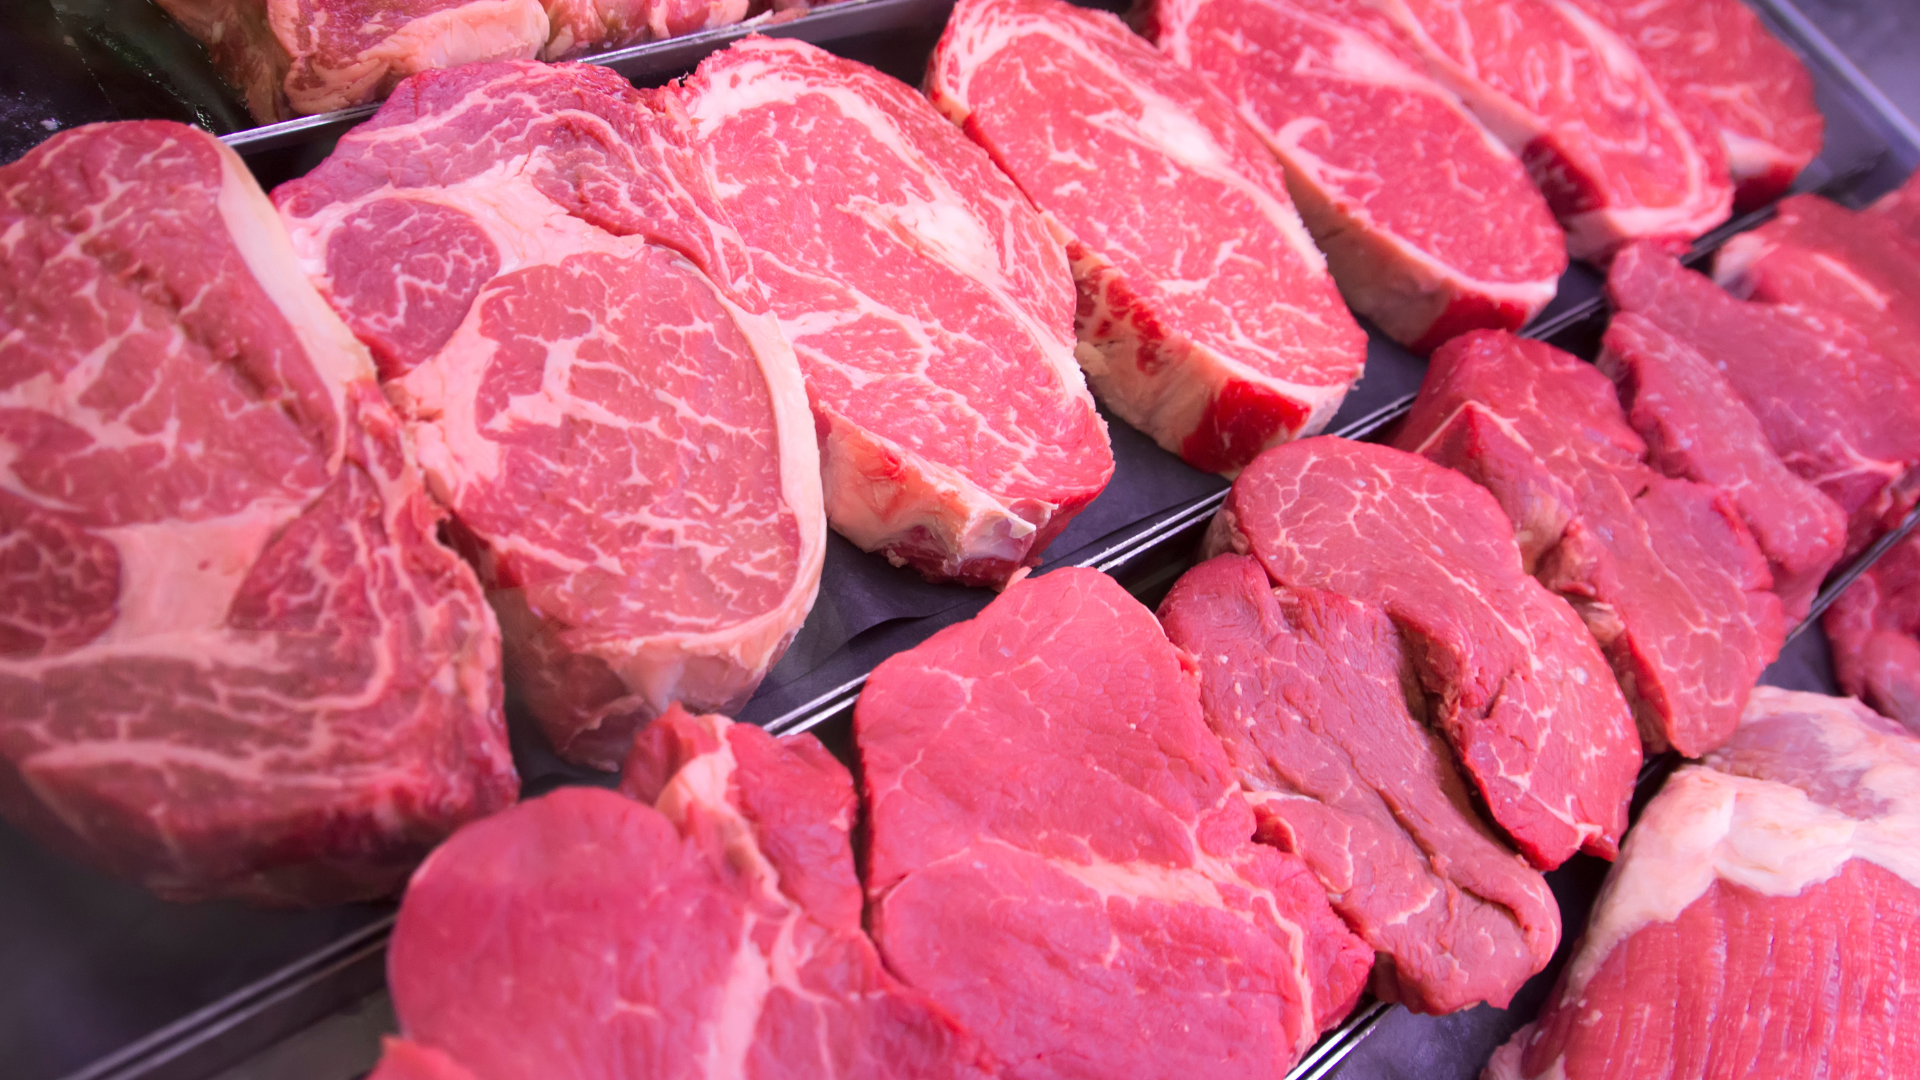 12% of Americans consume 50% of U.S. beef, reveals study.